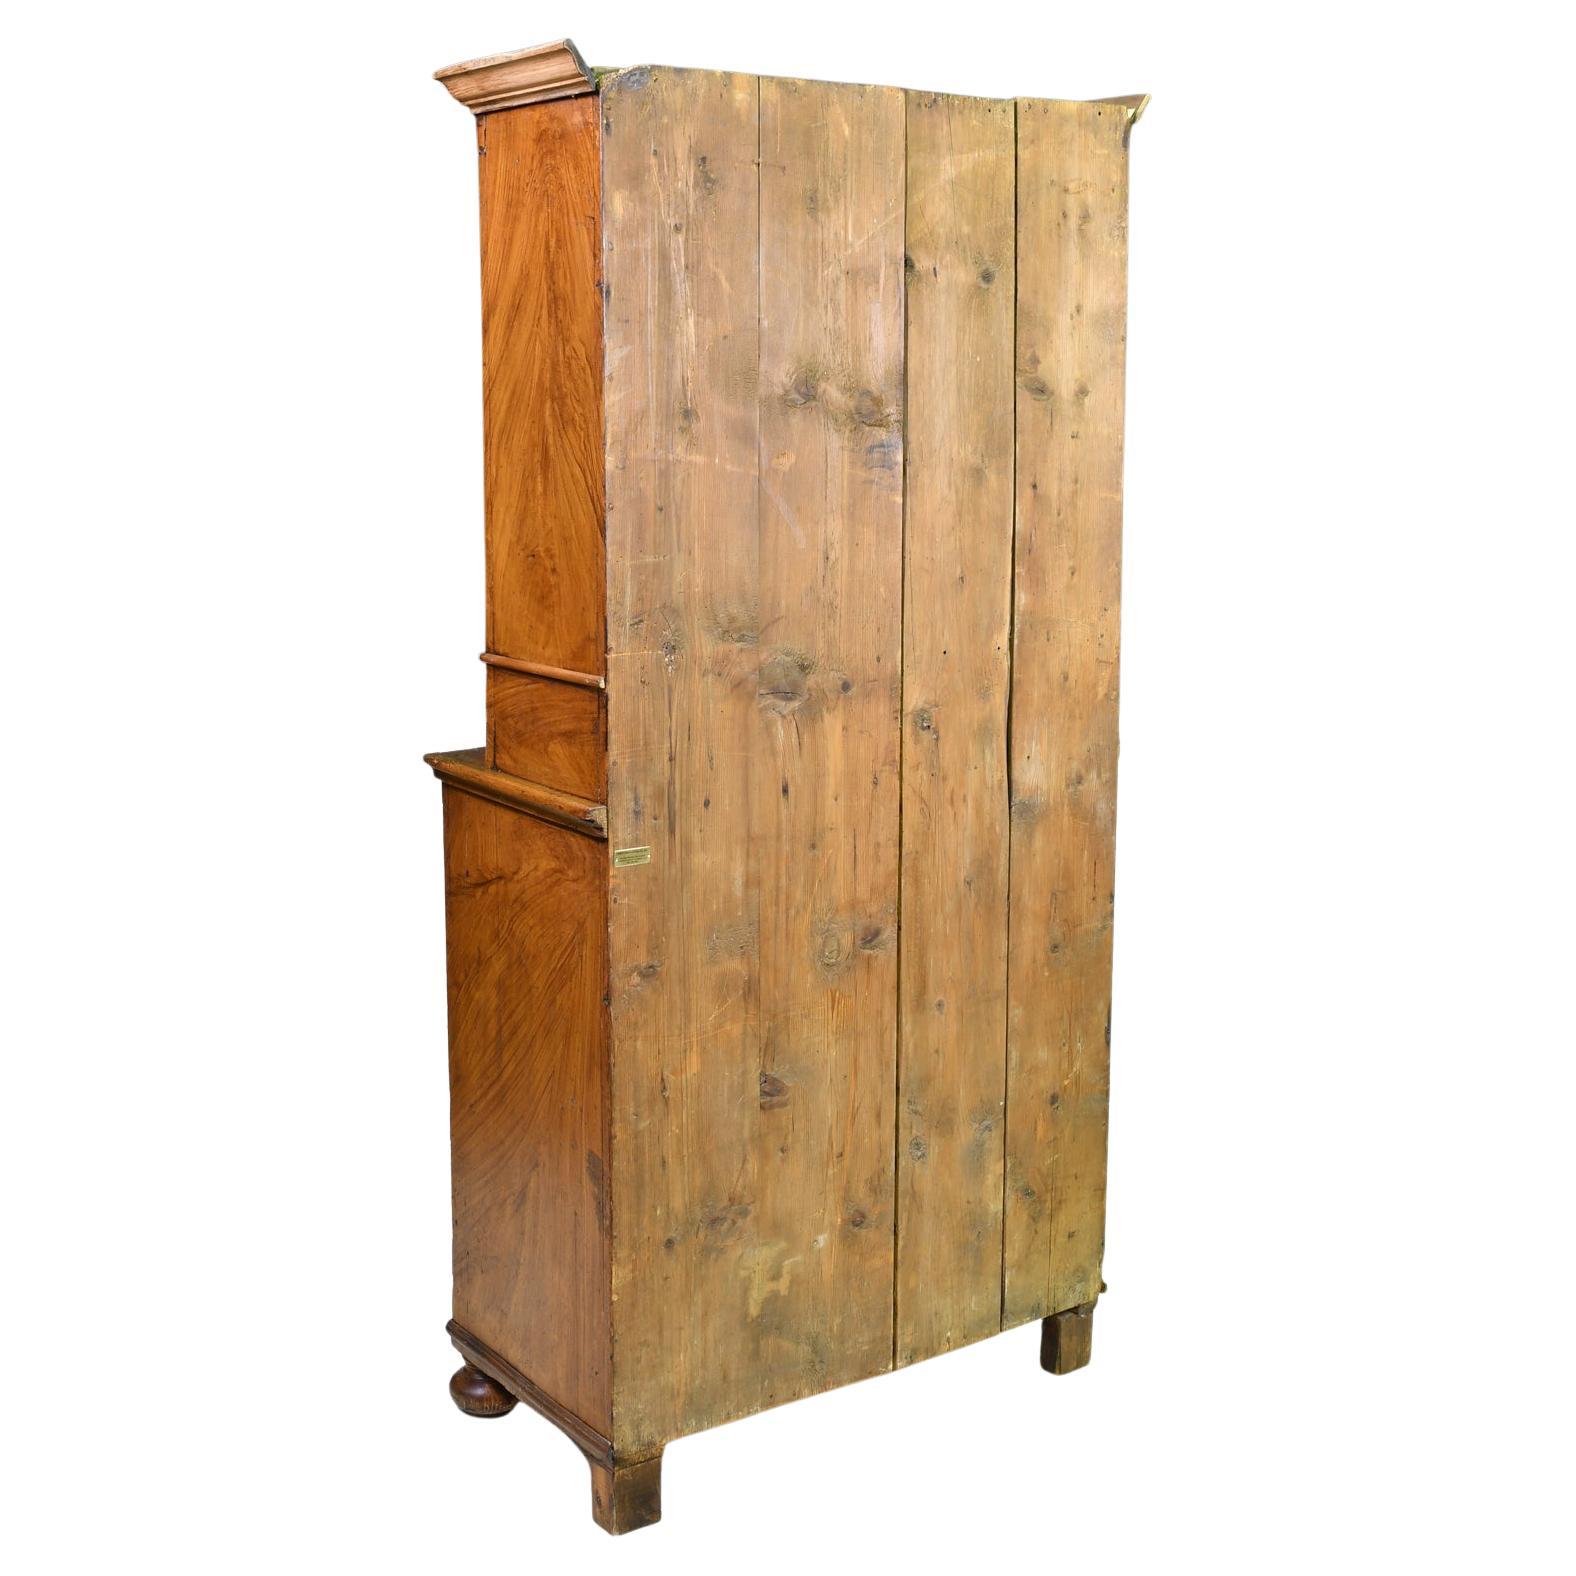 19th Century Antique Provincial Cupboard with Original Faux-Bois Painted Finish, c. 1830 For Sale